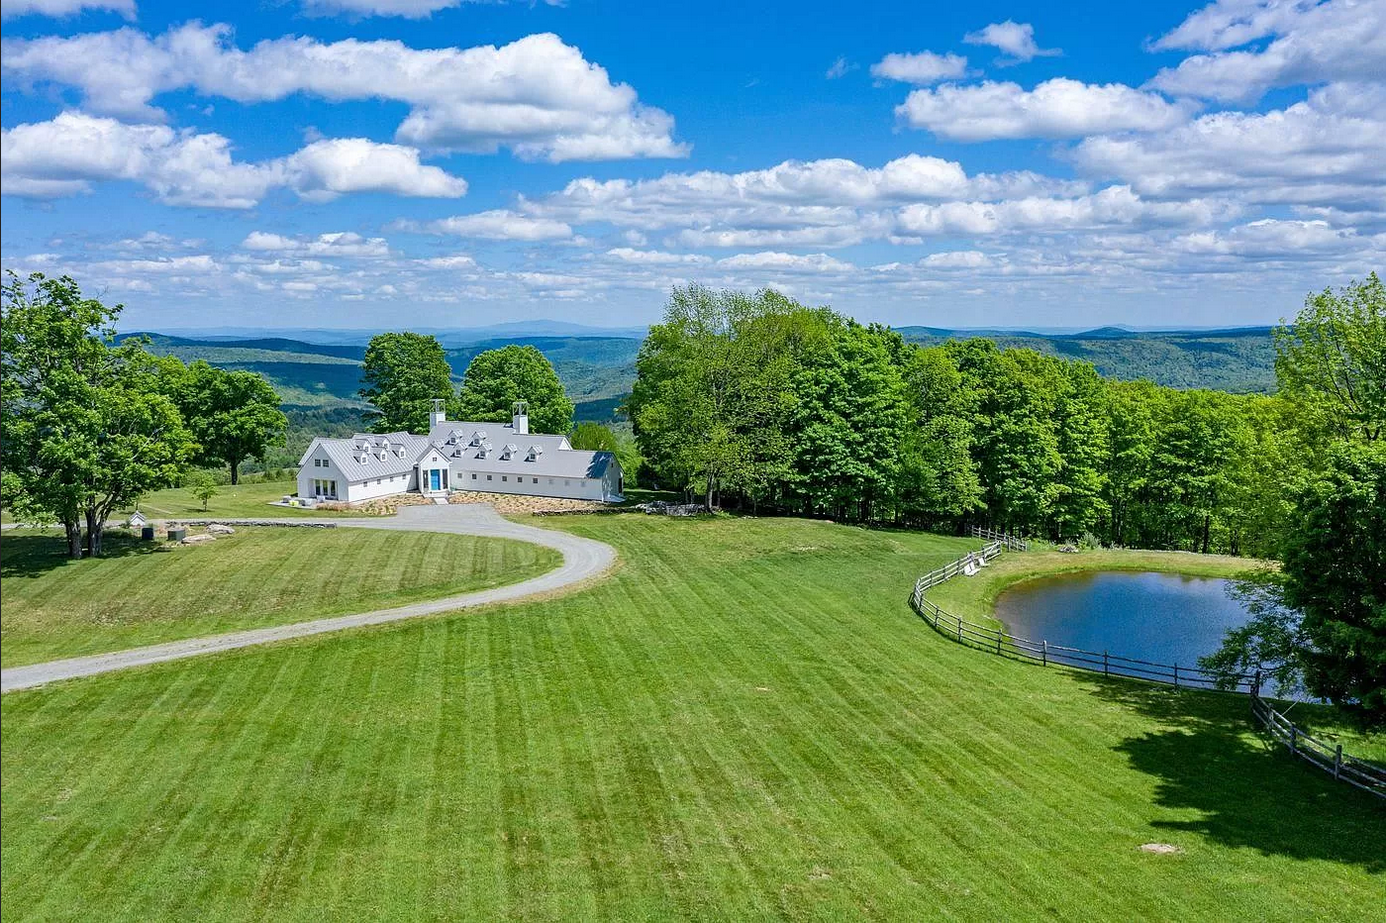 FOR SALE: Mansion Within Minutes of Mount Snow ($3.9 Million)